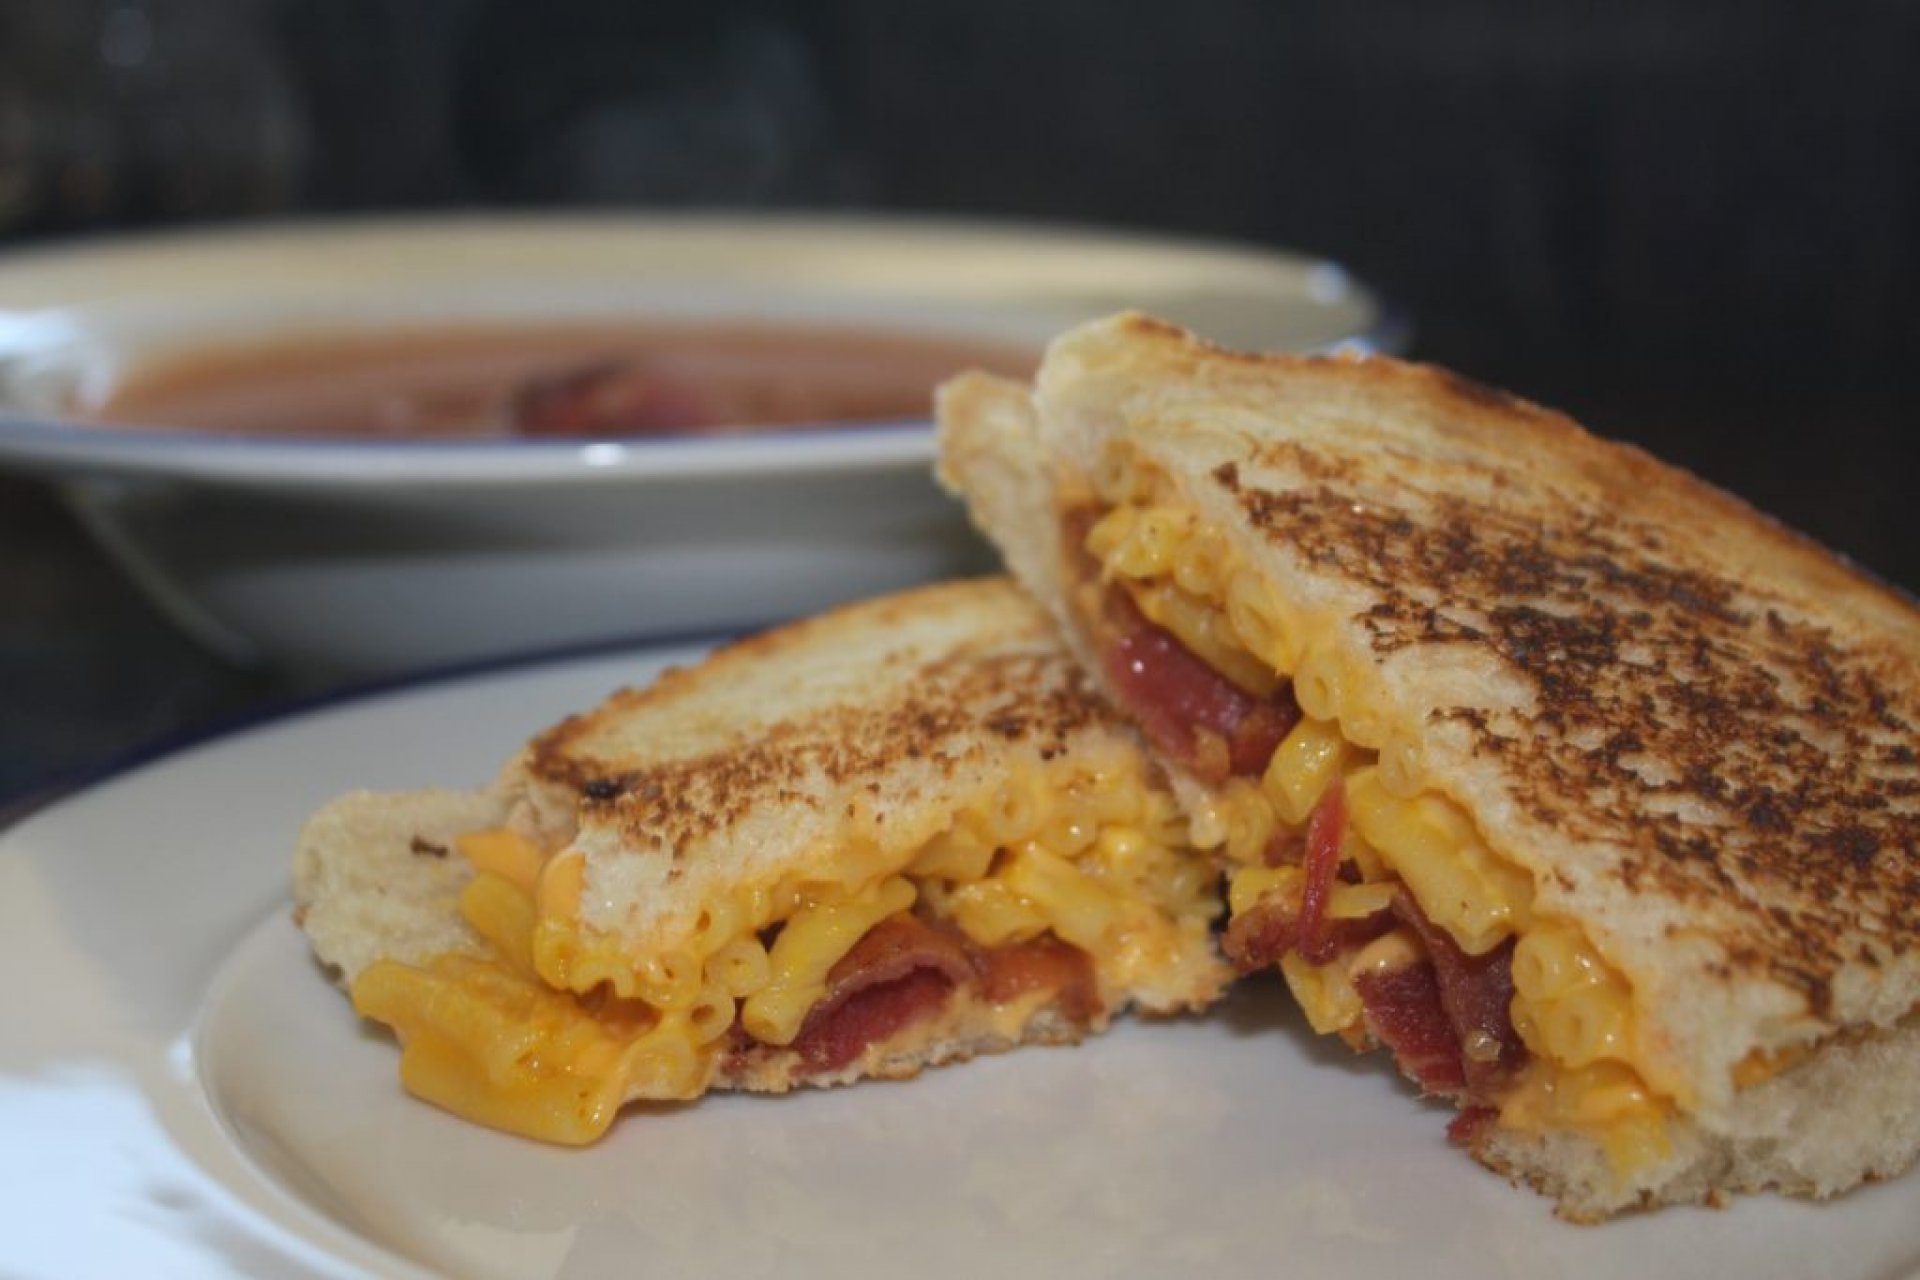 Grilled Mac-n-Cheese Sandwich with Tomato Soup. Photo | Curran Daly